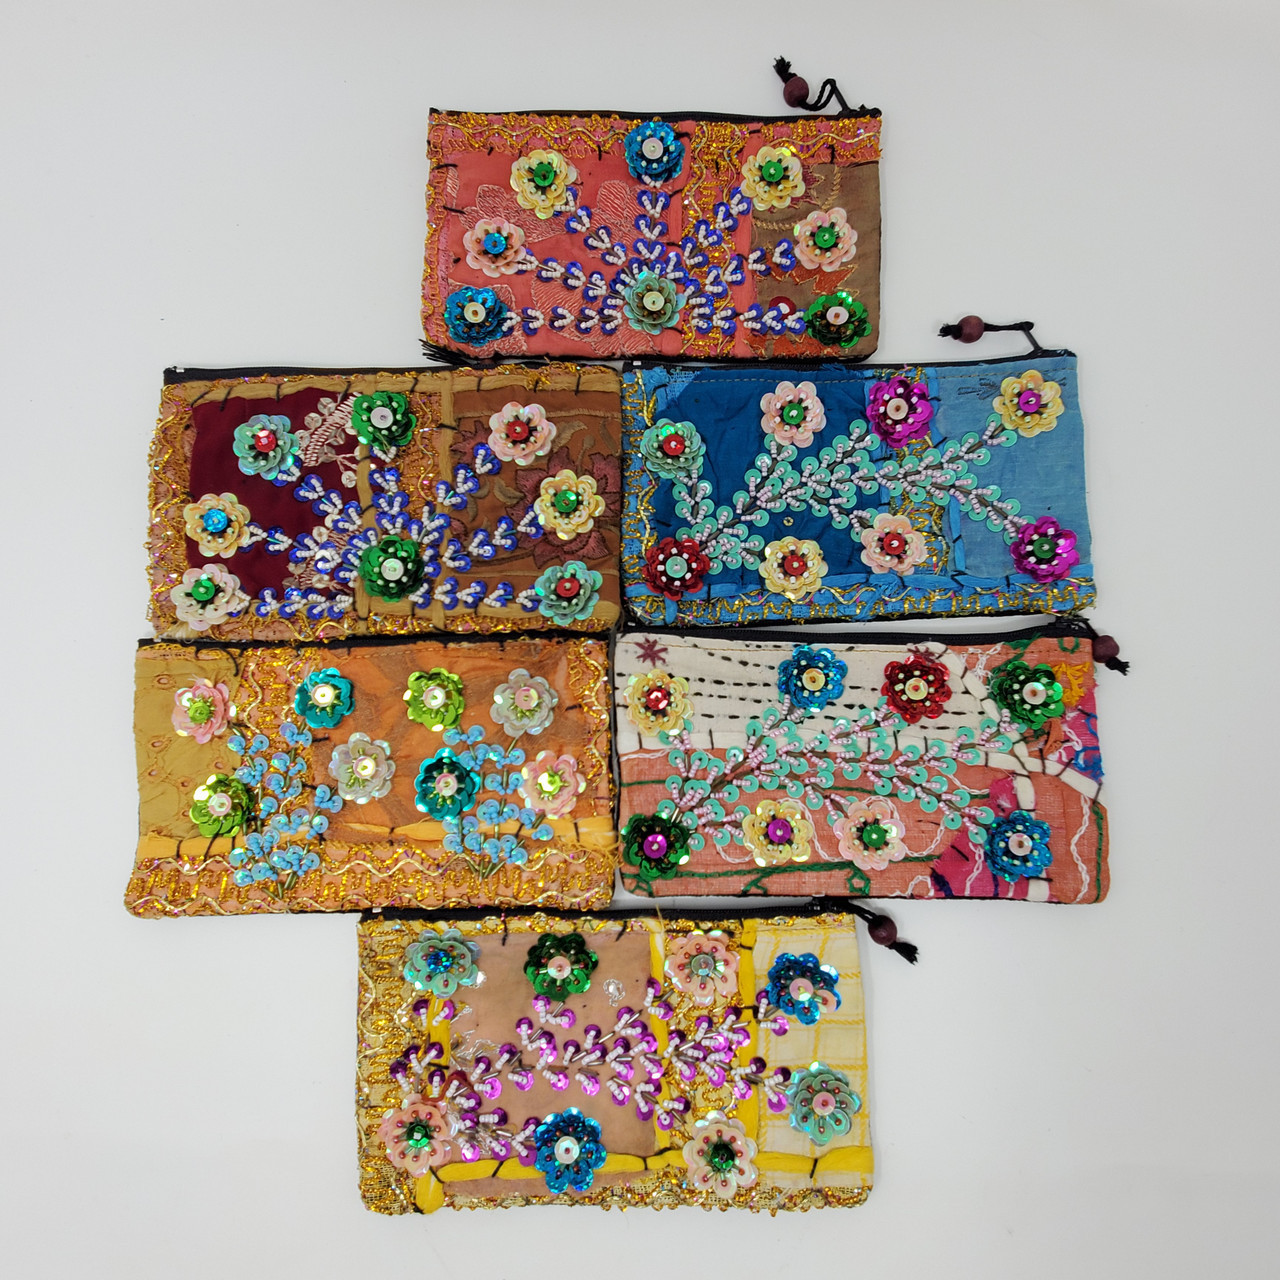 Beaded Bags & Purses for Sale at Auction - Page 2